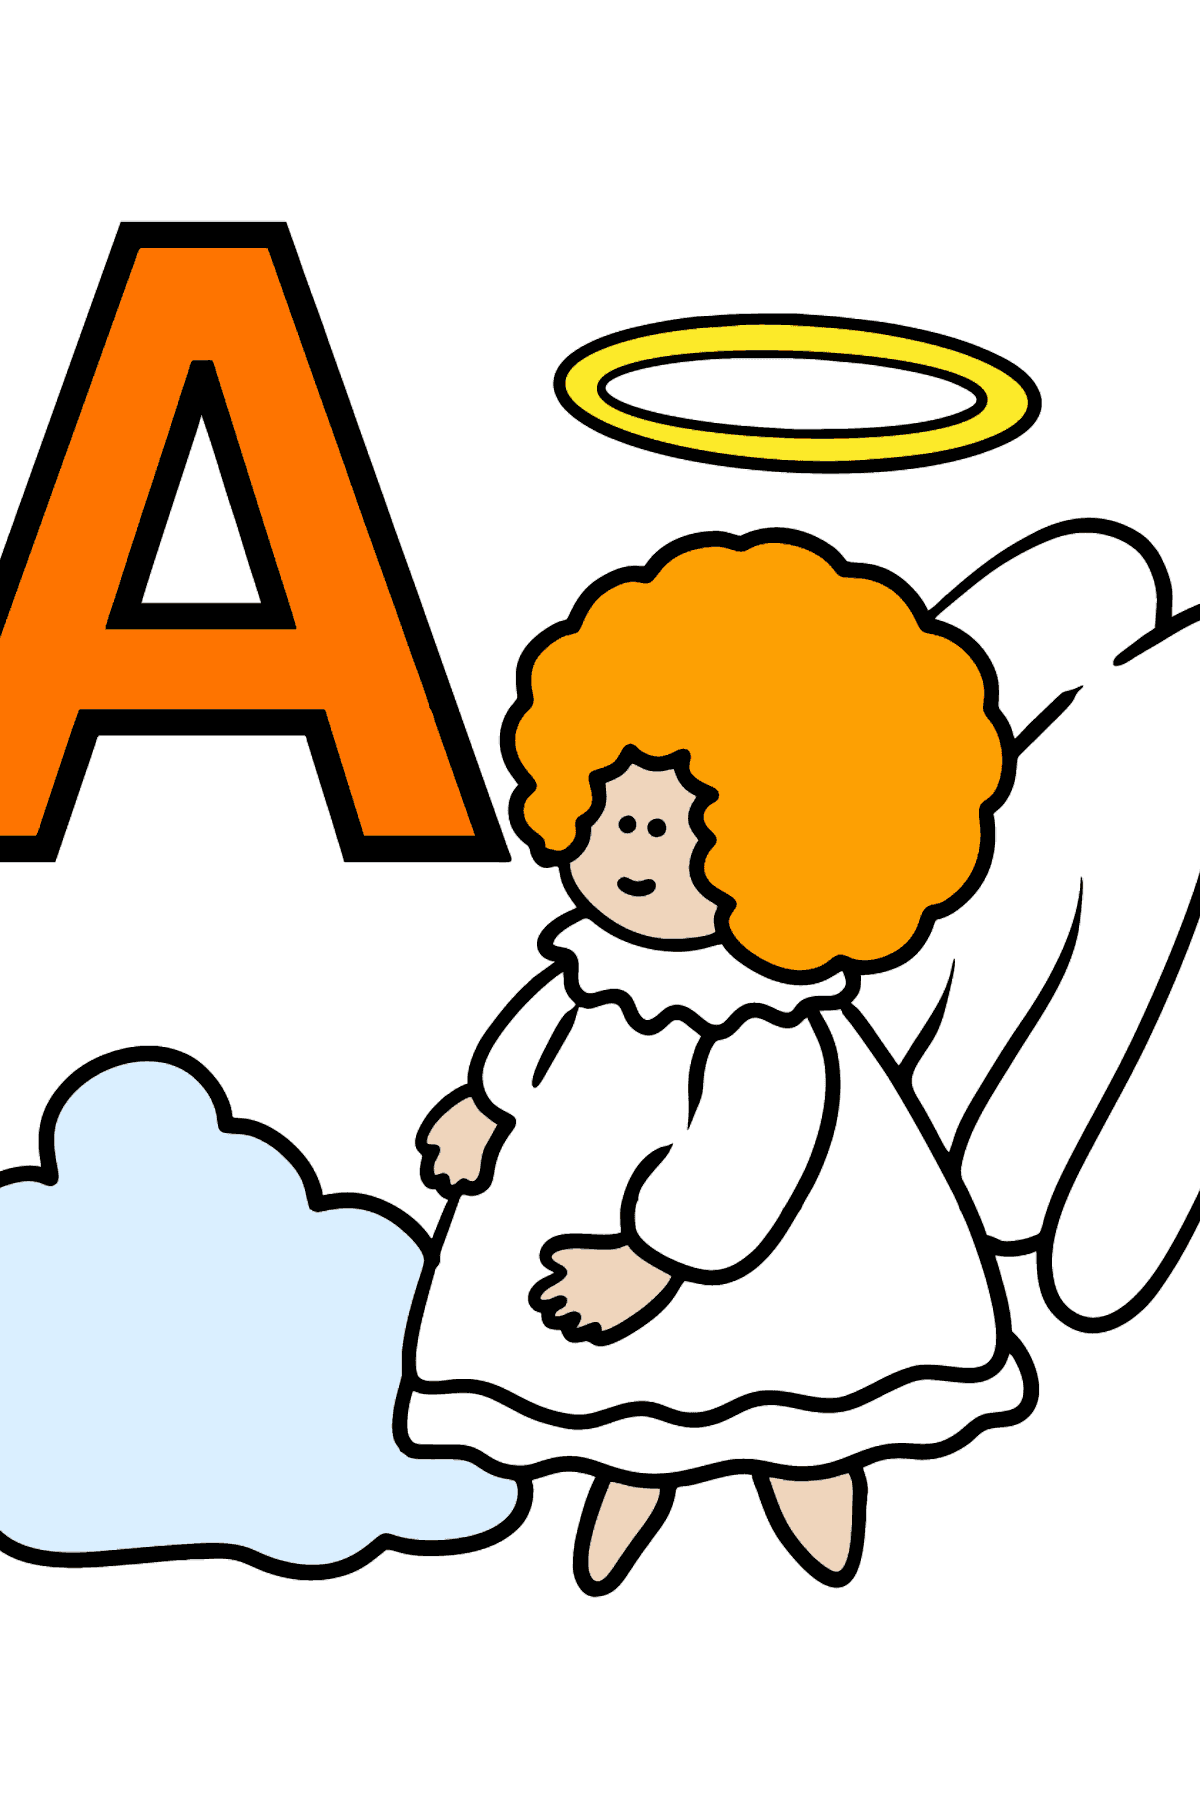 English Letter A coloring pages - ANGEL - Coloring Pages for Kids